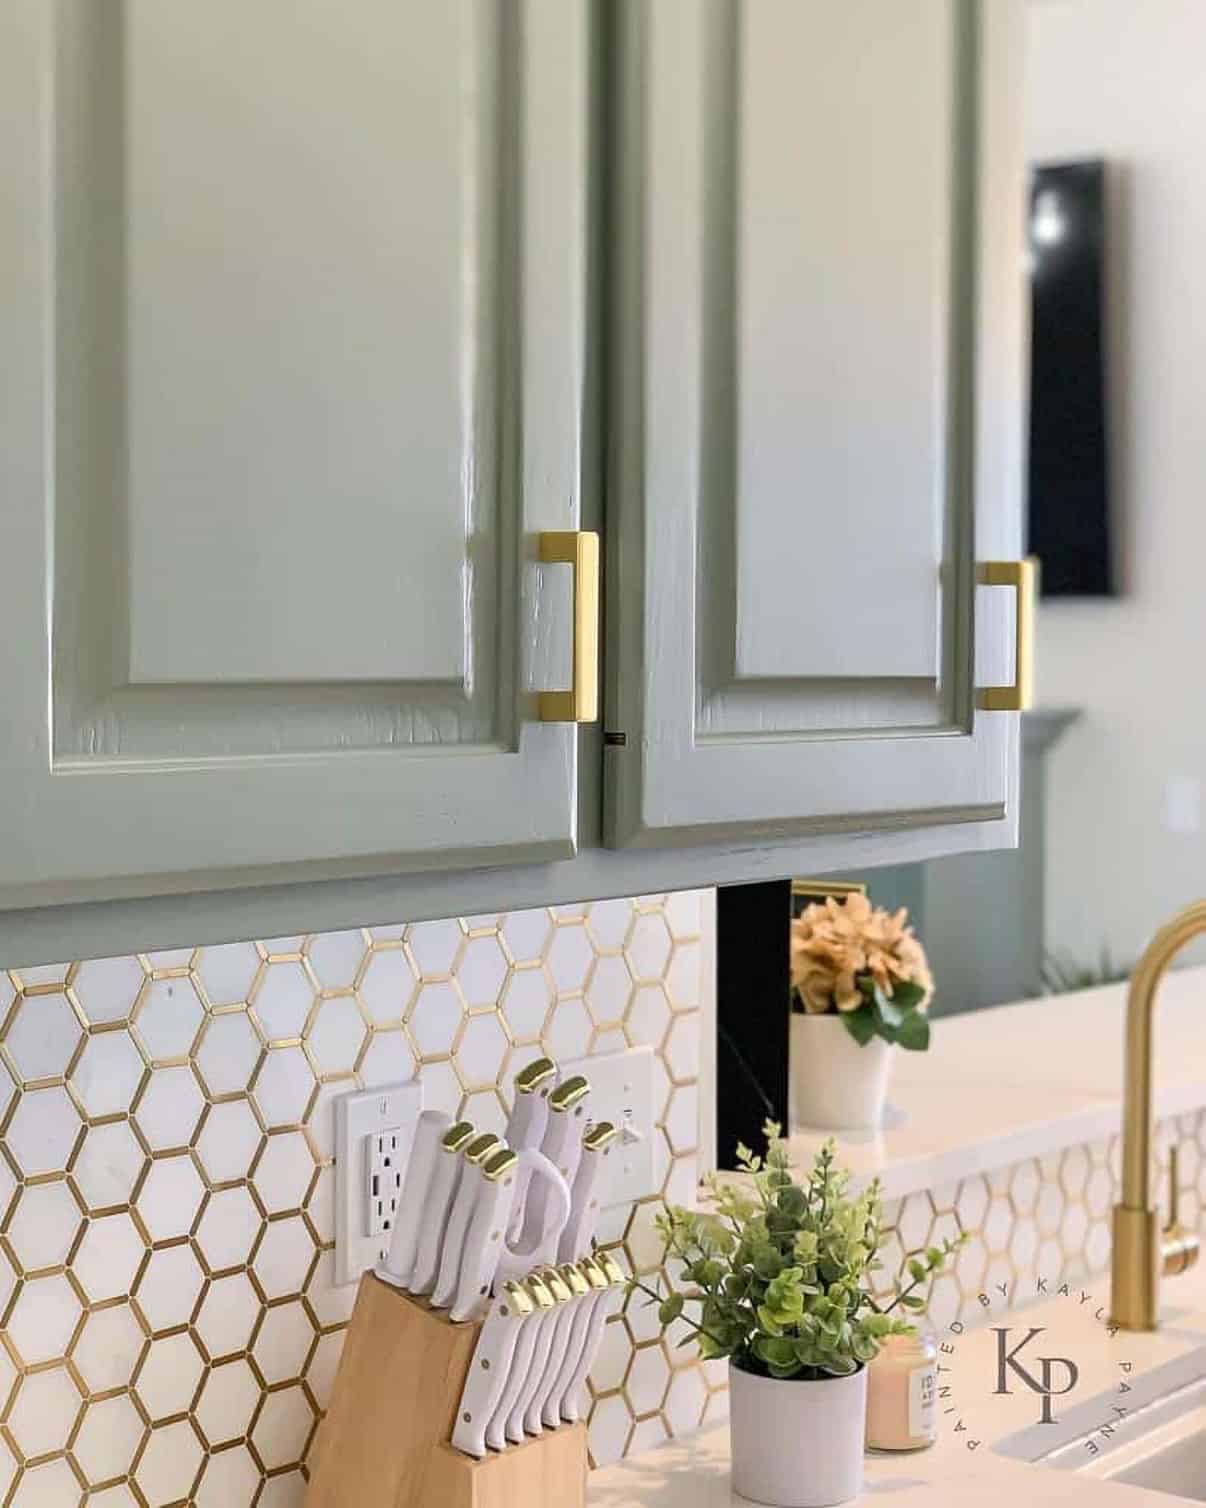 Sherwin Williams evergreen fog painted cabinets with gold hardware and accents.